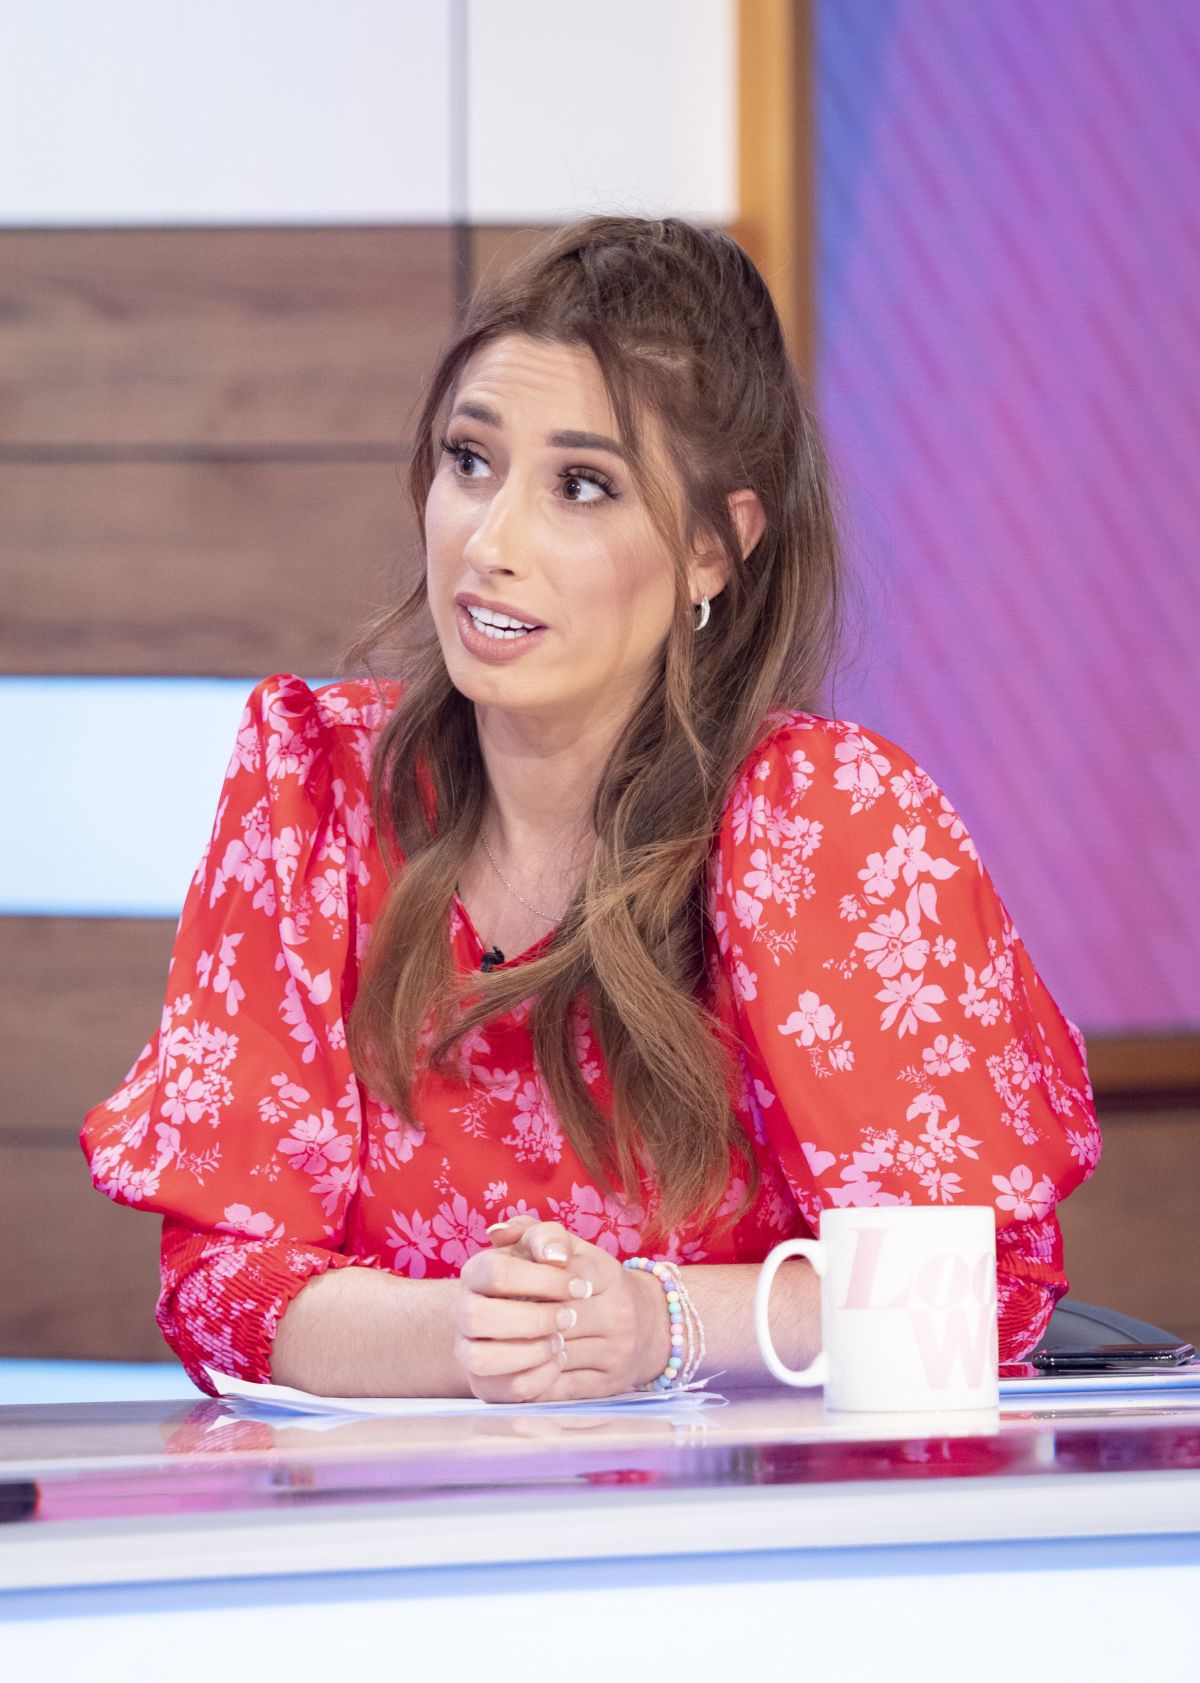 Stacey Solomon At Loose Women Tv Show In London 02 21 2020